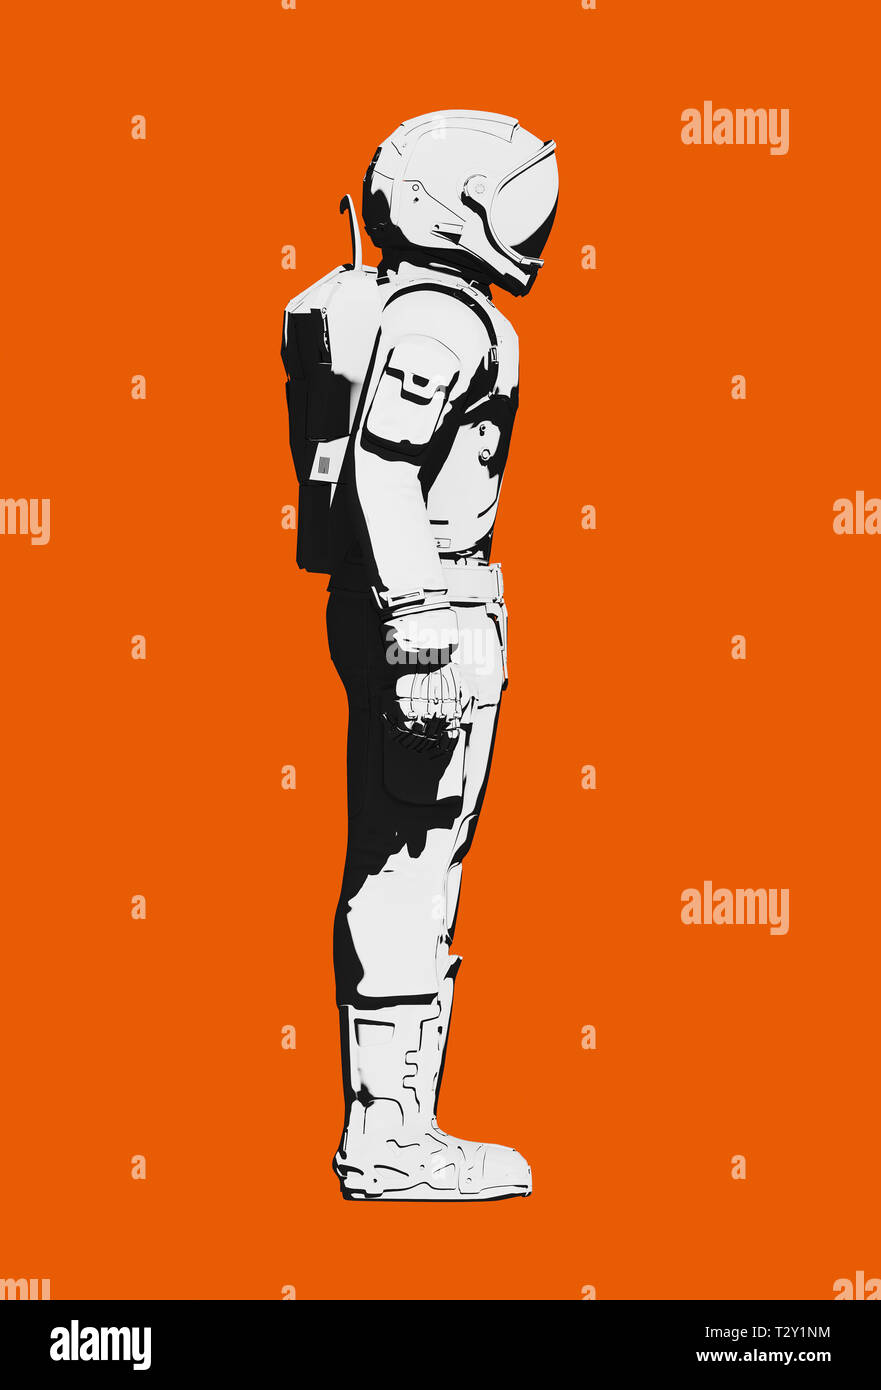 Black and white astronaut  functional extravehicular activity space suit on orange background. Front view close up, line art rendering digital illustr Stock Photo